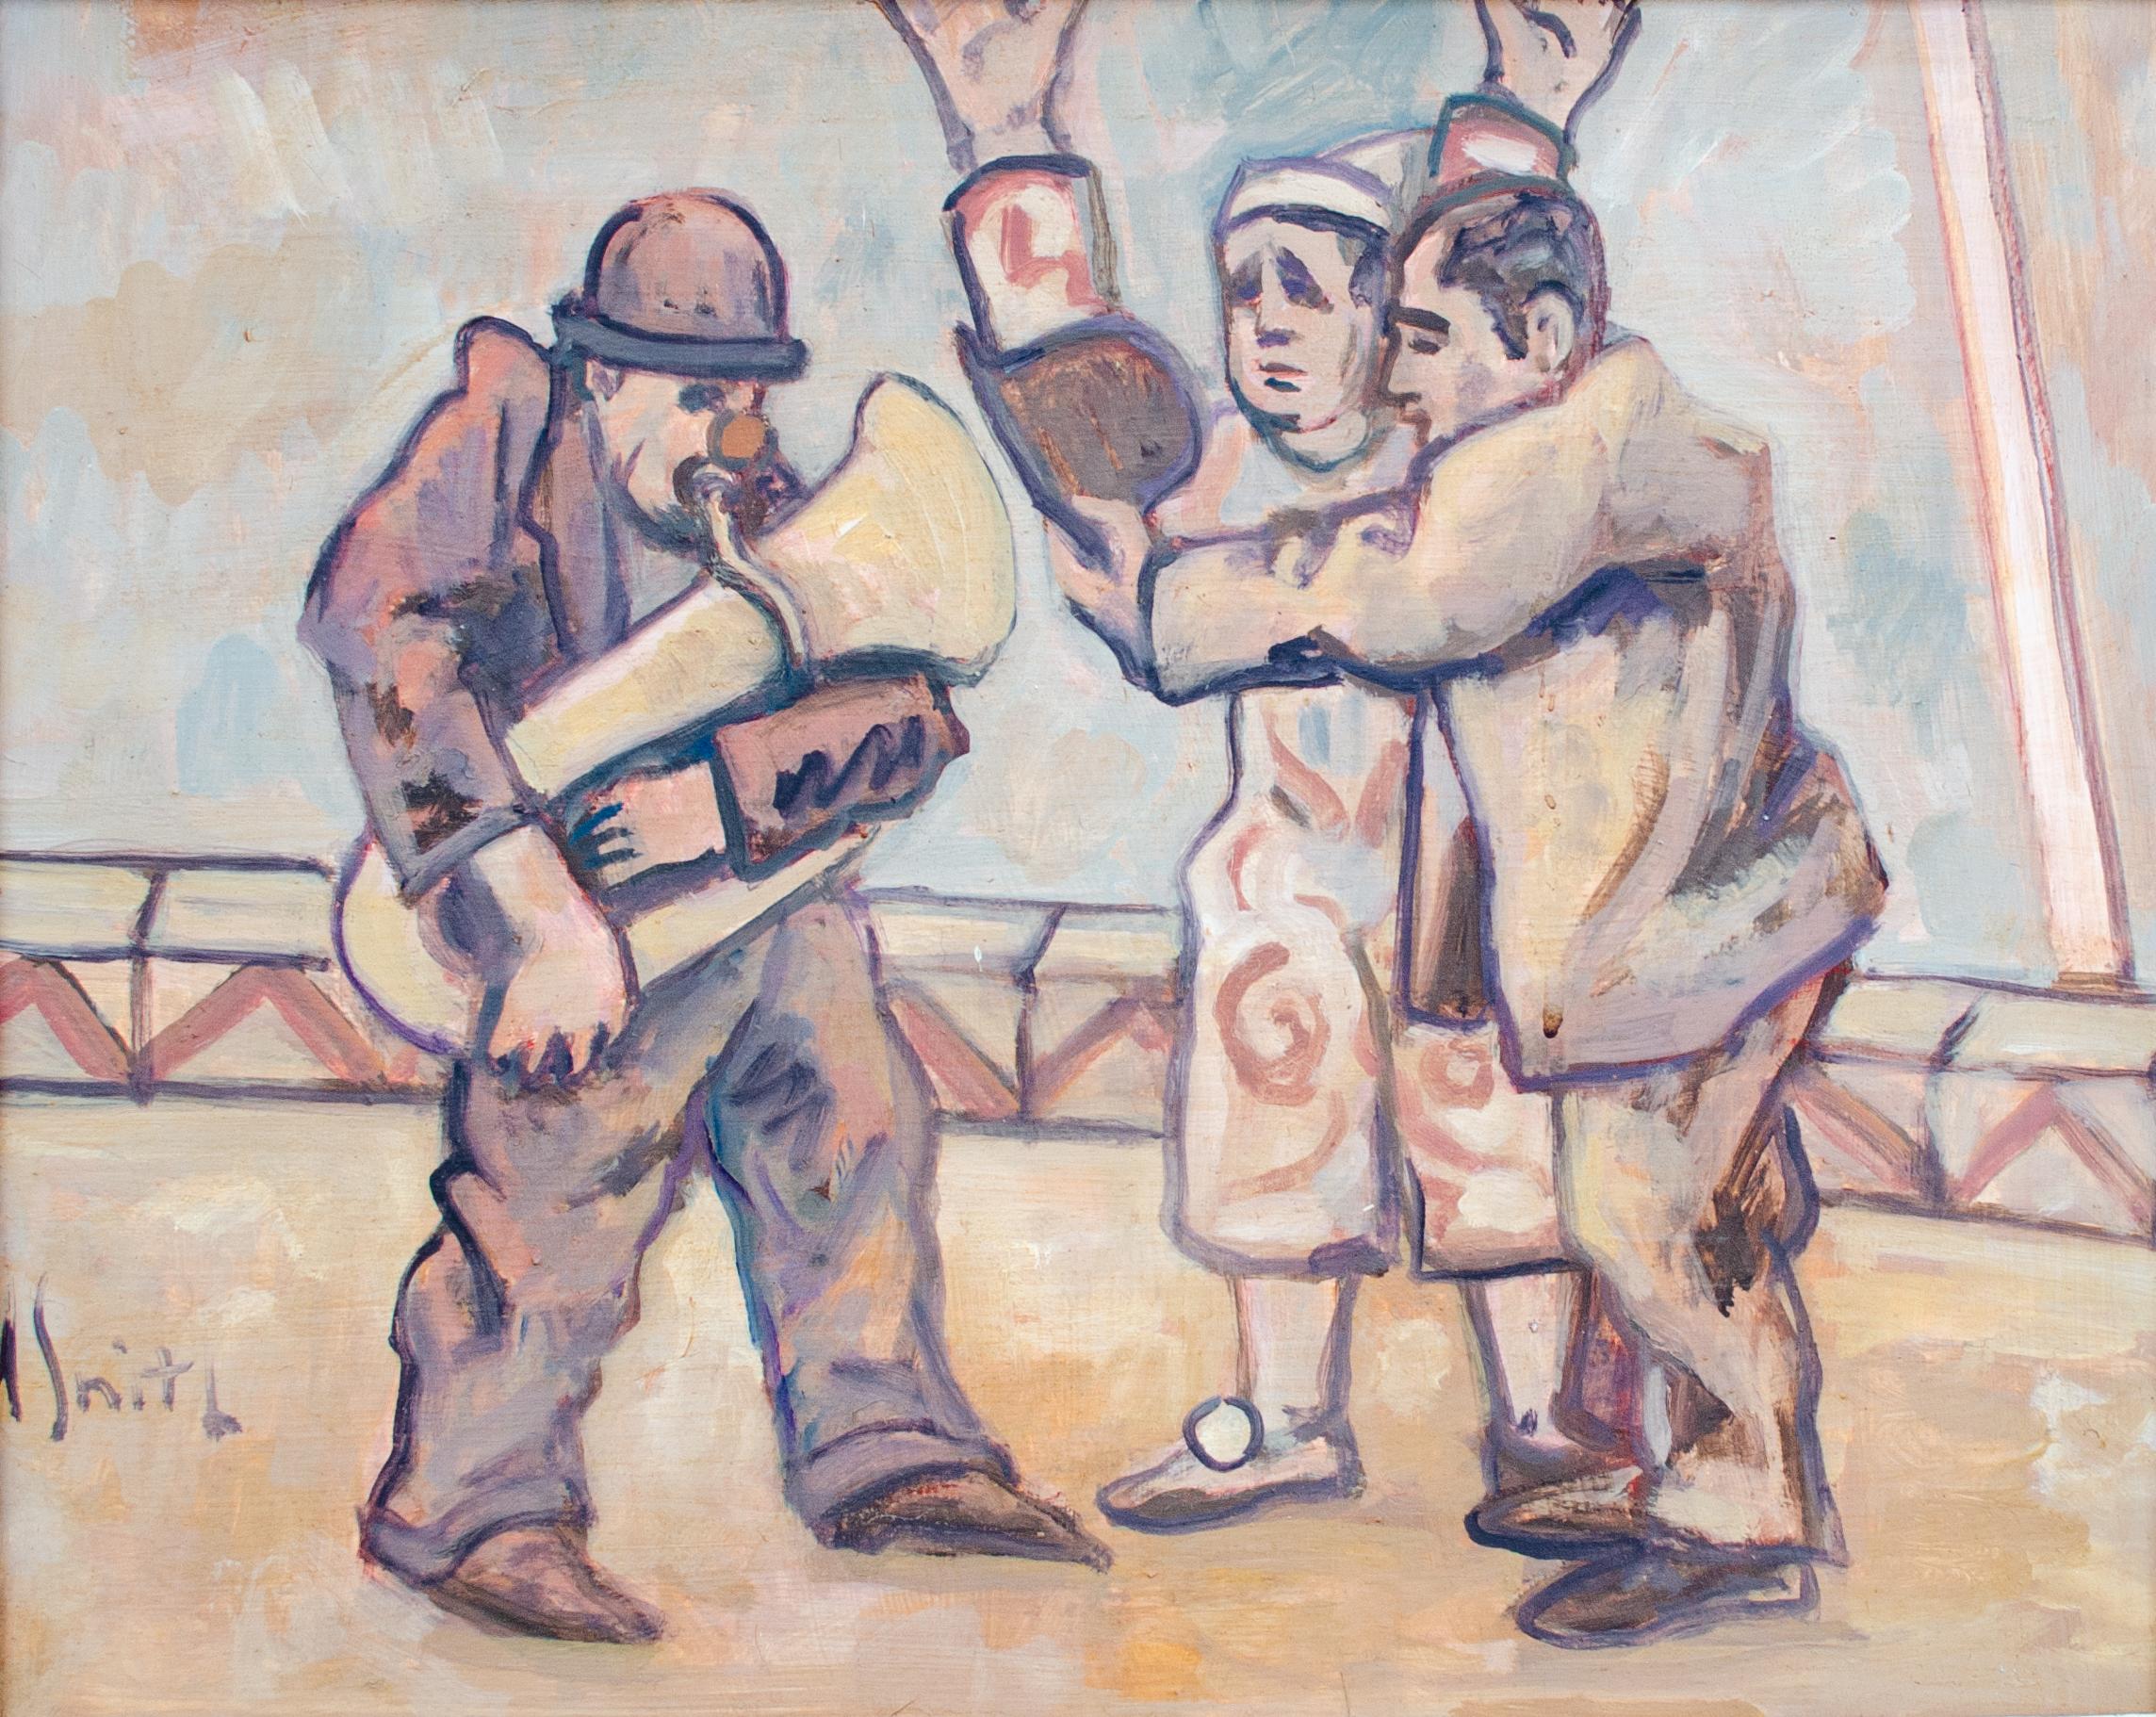 Arthur Smith (American, 1897-1972)
Untitled (Circus Figures), 20th century
Oil on board
16 x 19 3/4 in. 
Framed: 20 x 24 in. 
Signed lower left: A Smith

Arthur Smith is a listed American painter most famous for his paintings of sporting scenes,